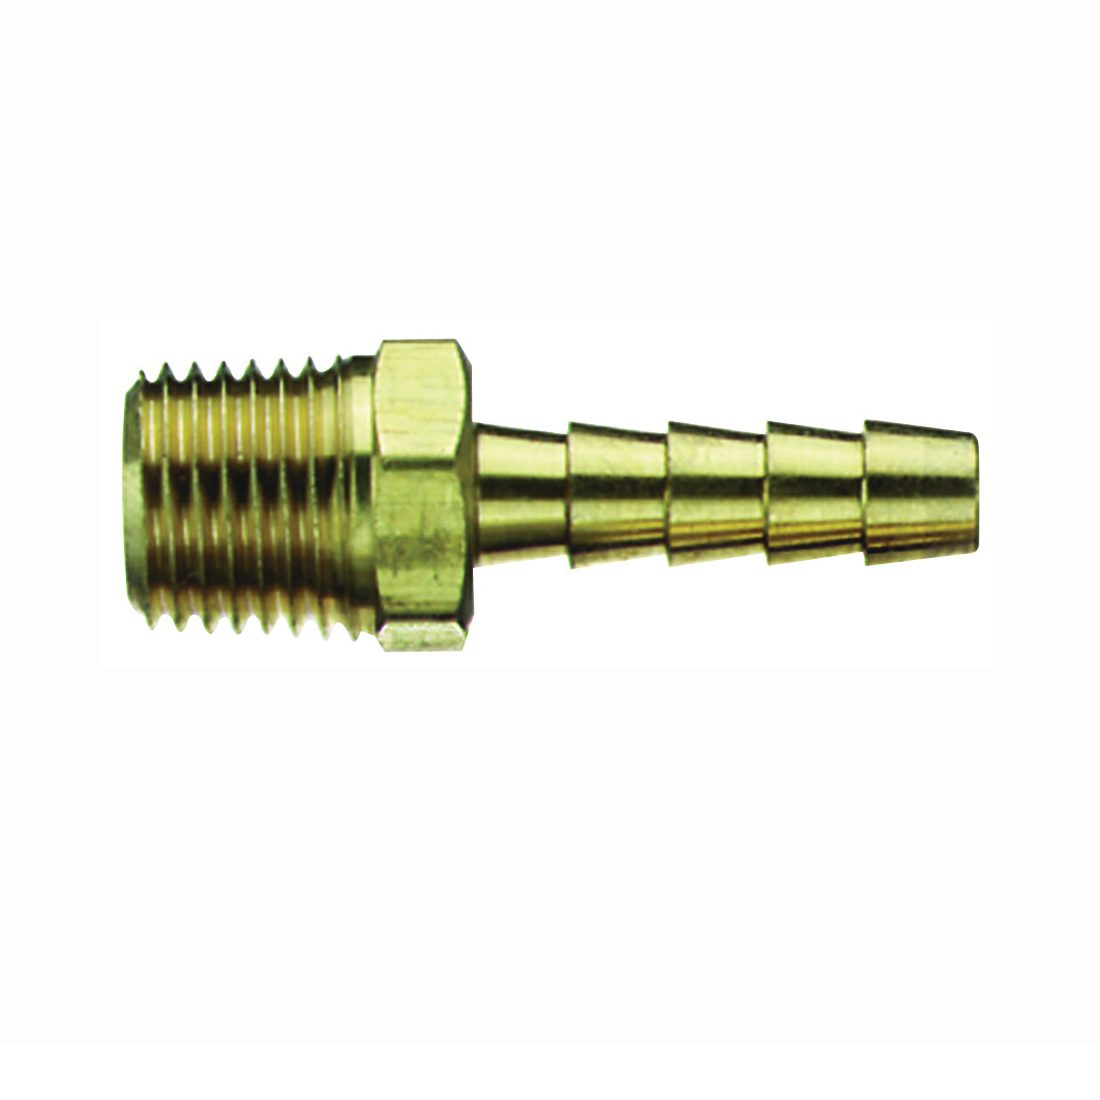 21-133 Air Hose Fitting, 1/4 in, MNPT x Barb, Brass